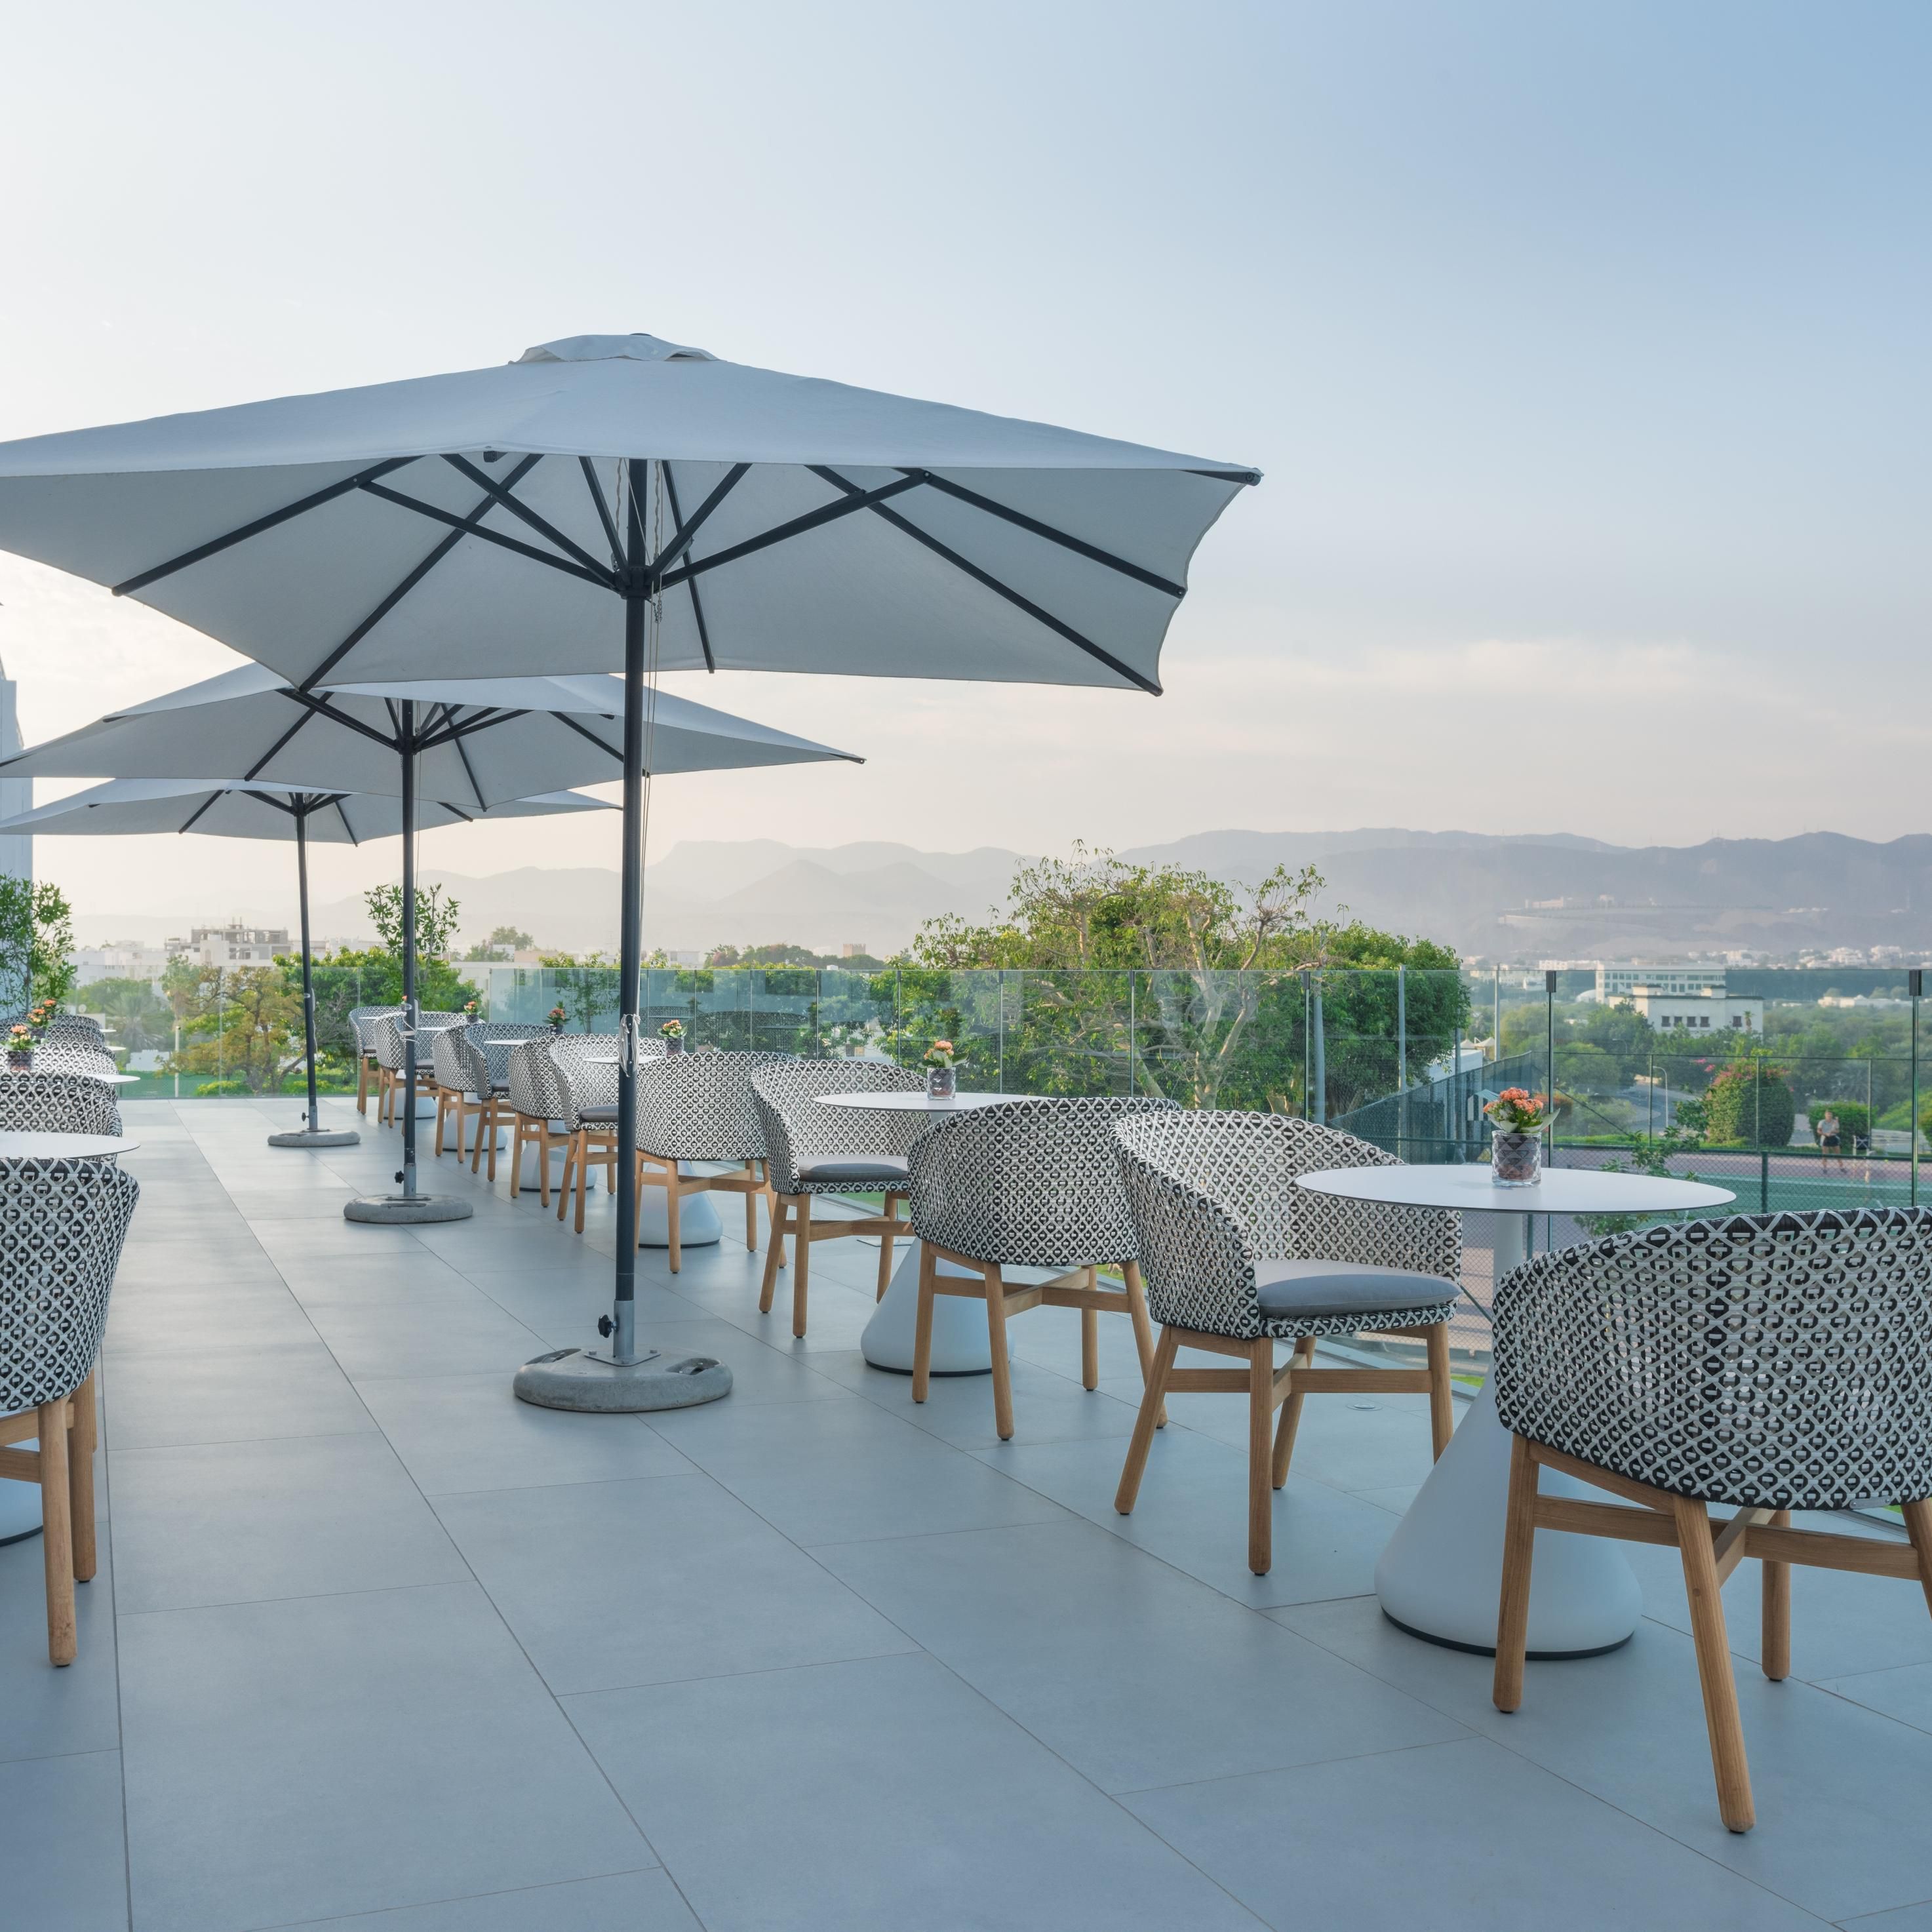 Qurum Tea Lounge Terrace with a stunning panoramic view